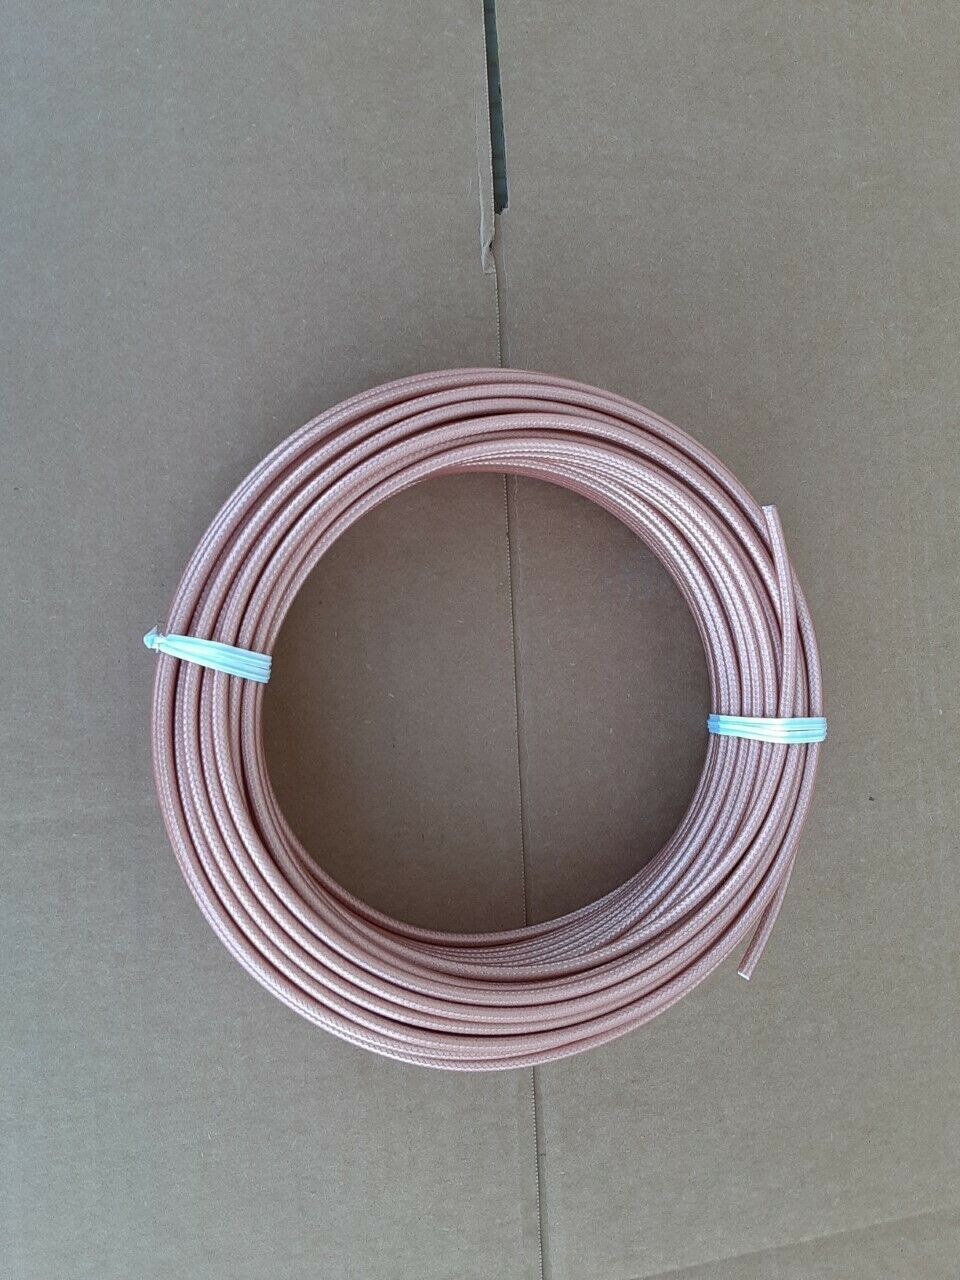 RG-400 Double Shielded Bulk 50 Ohm High Temperature Coax Cable 100 FT